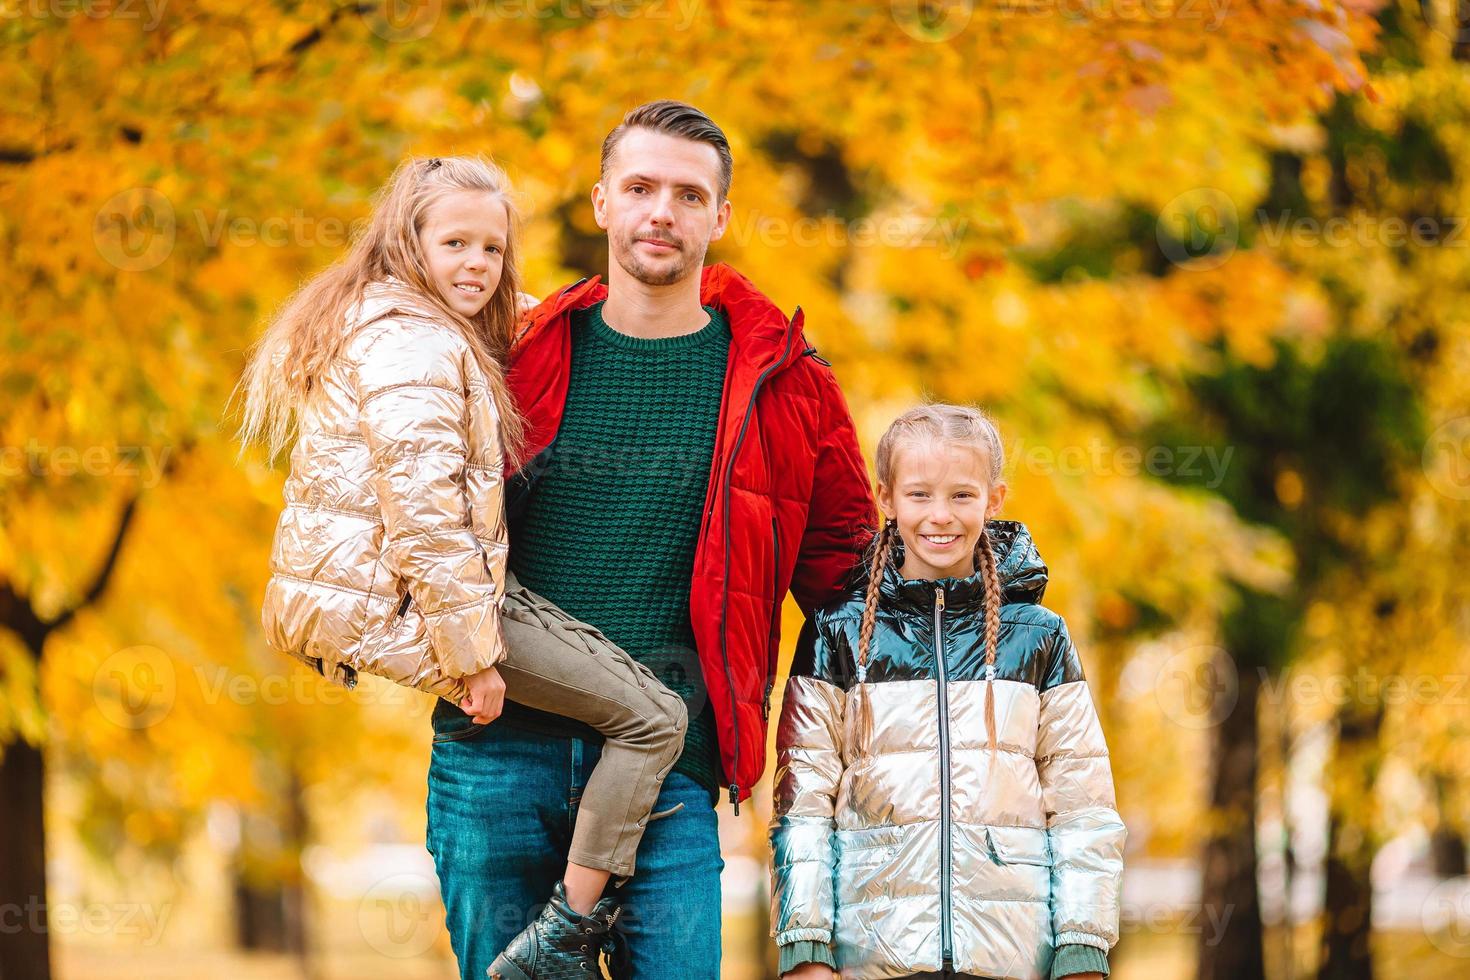 Family of dad and kids on beautiful autumn day in the park photo